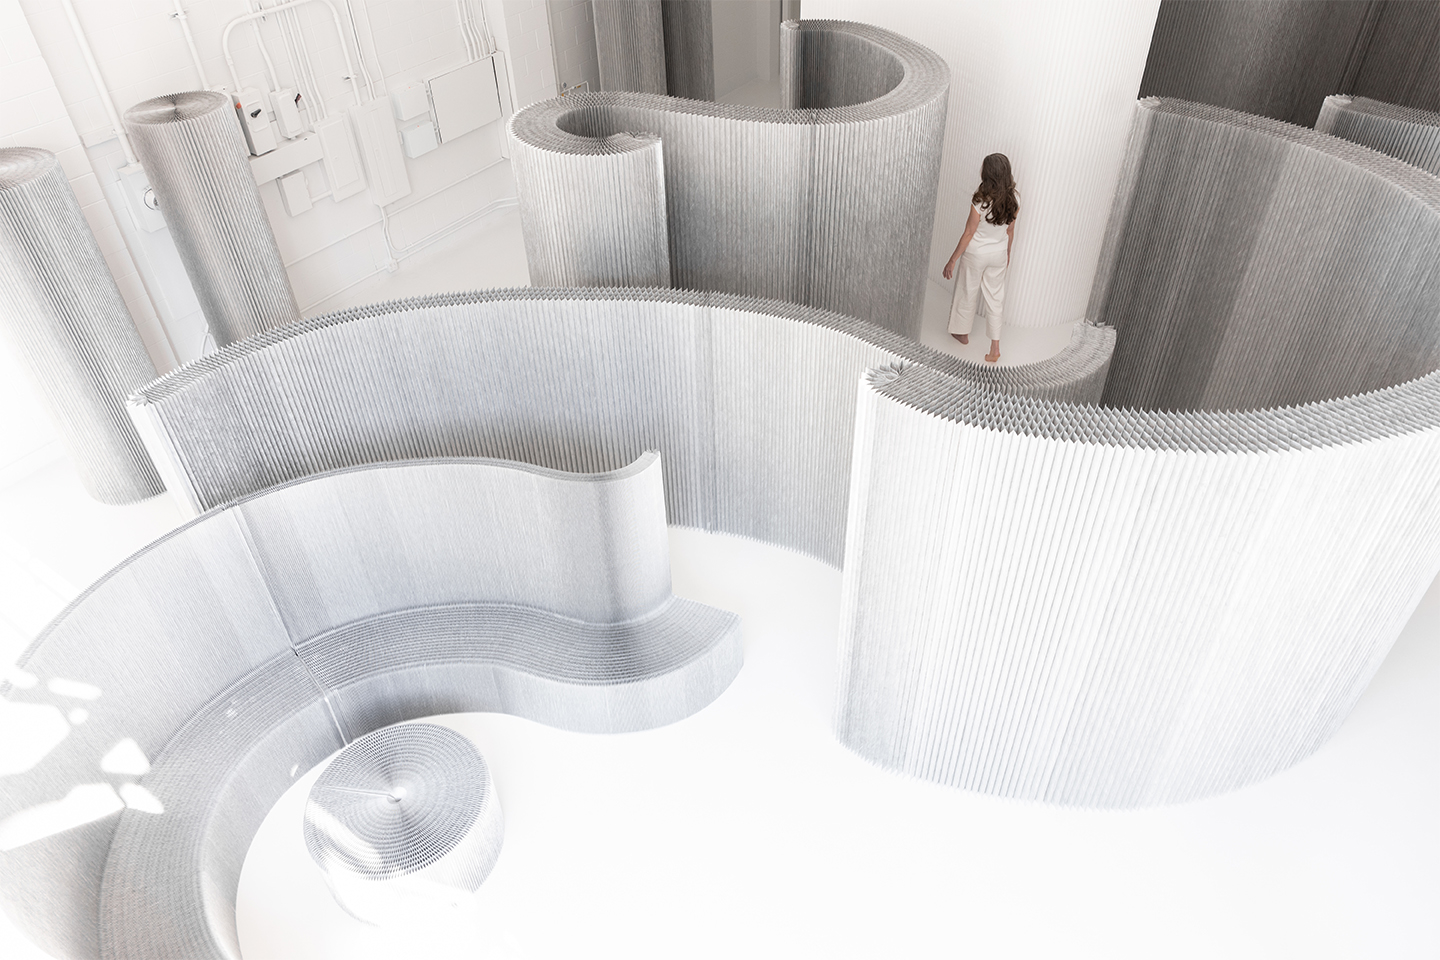 molo's custom wall partitions and paper furniture